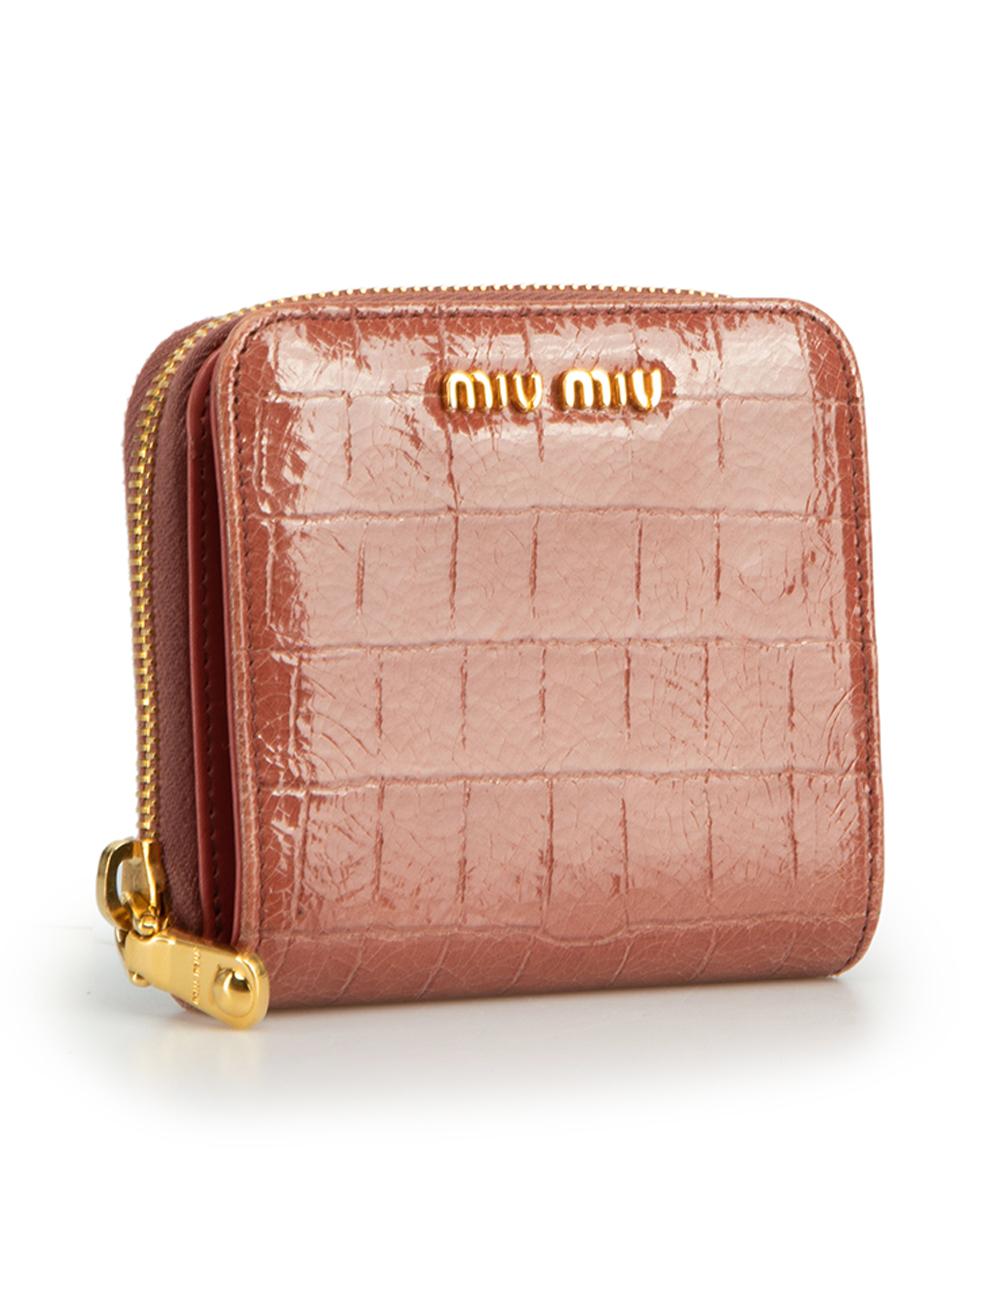 CONDITION is Very good. Minimal wear to purse is evident. Minimal wear to the edges of the purse with light scuffing on this used Miu Miu designer resale item. This purse comes with original dust bag.



Details


Pink

Patent leather

Crocodile